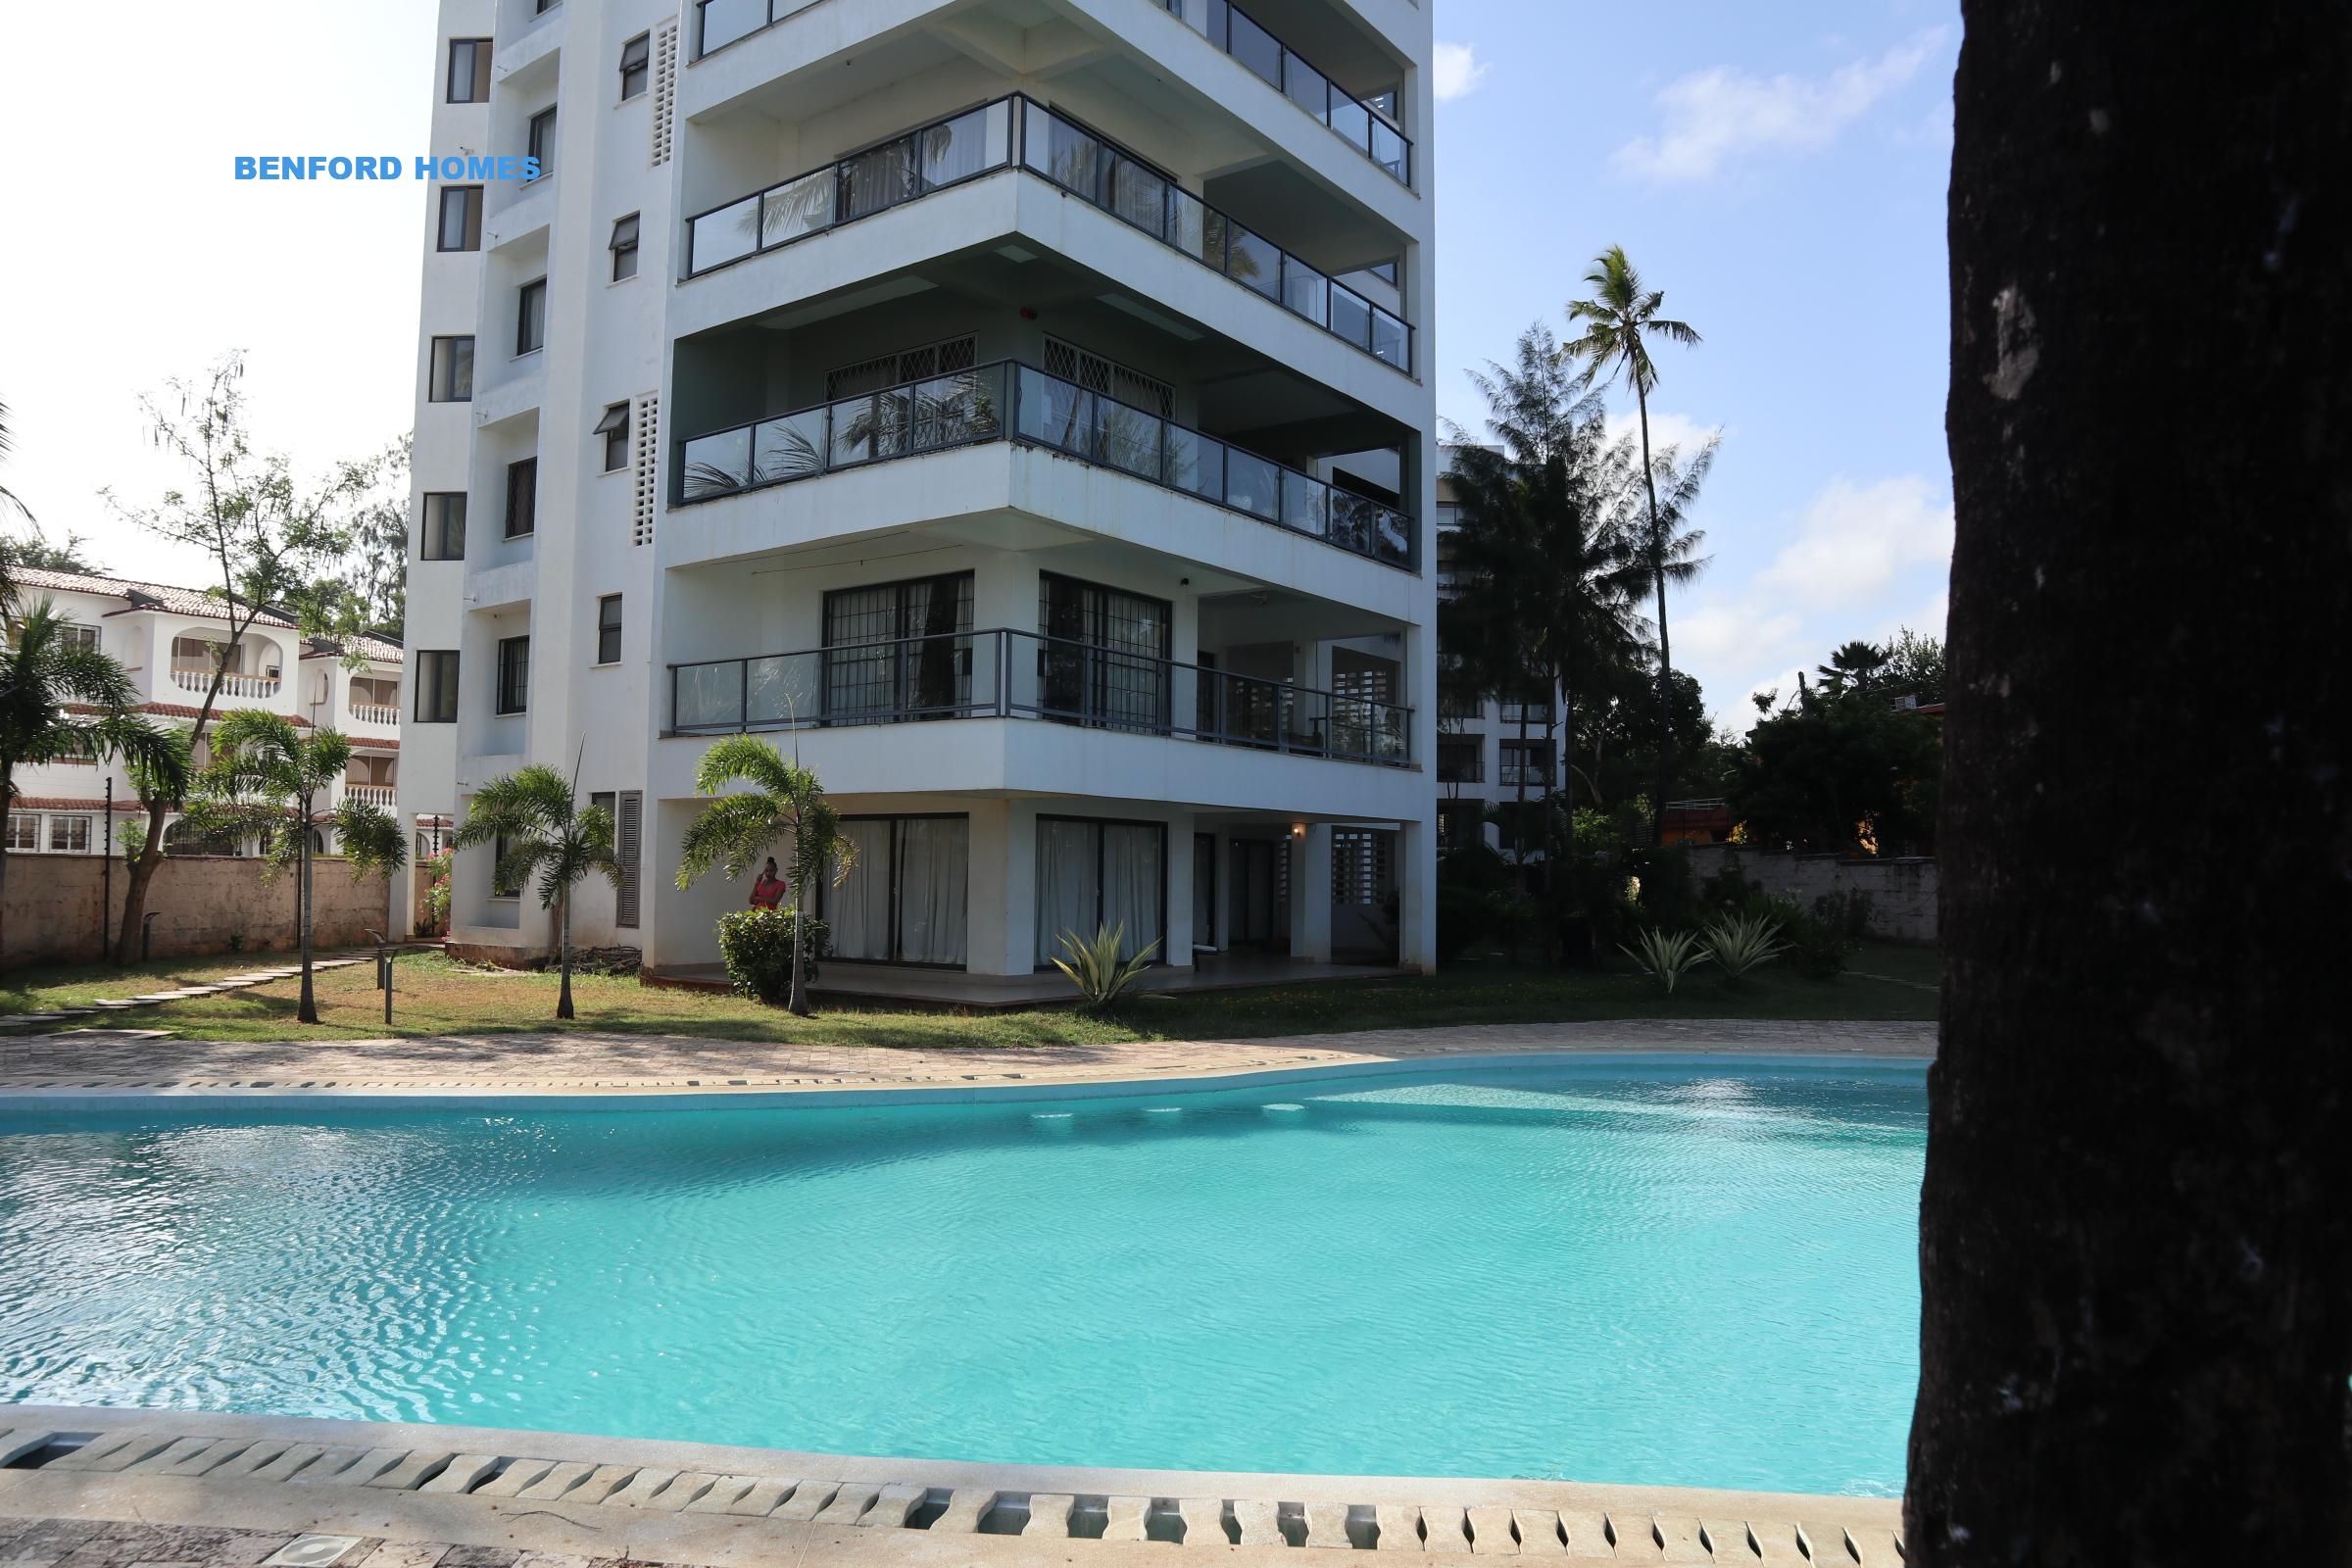 Sky blue swimming pool edging with an imposing 3 bedroom modern apartment| Benford Homes